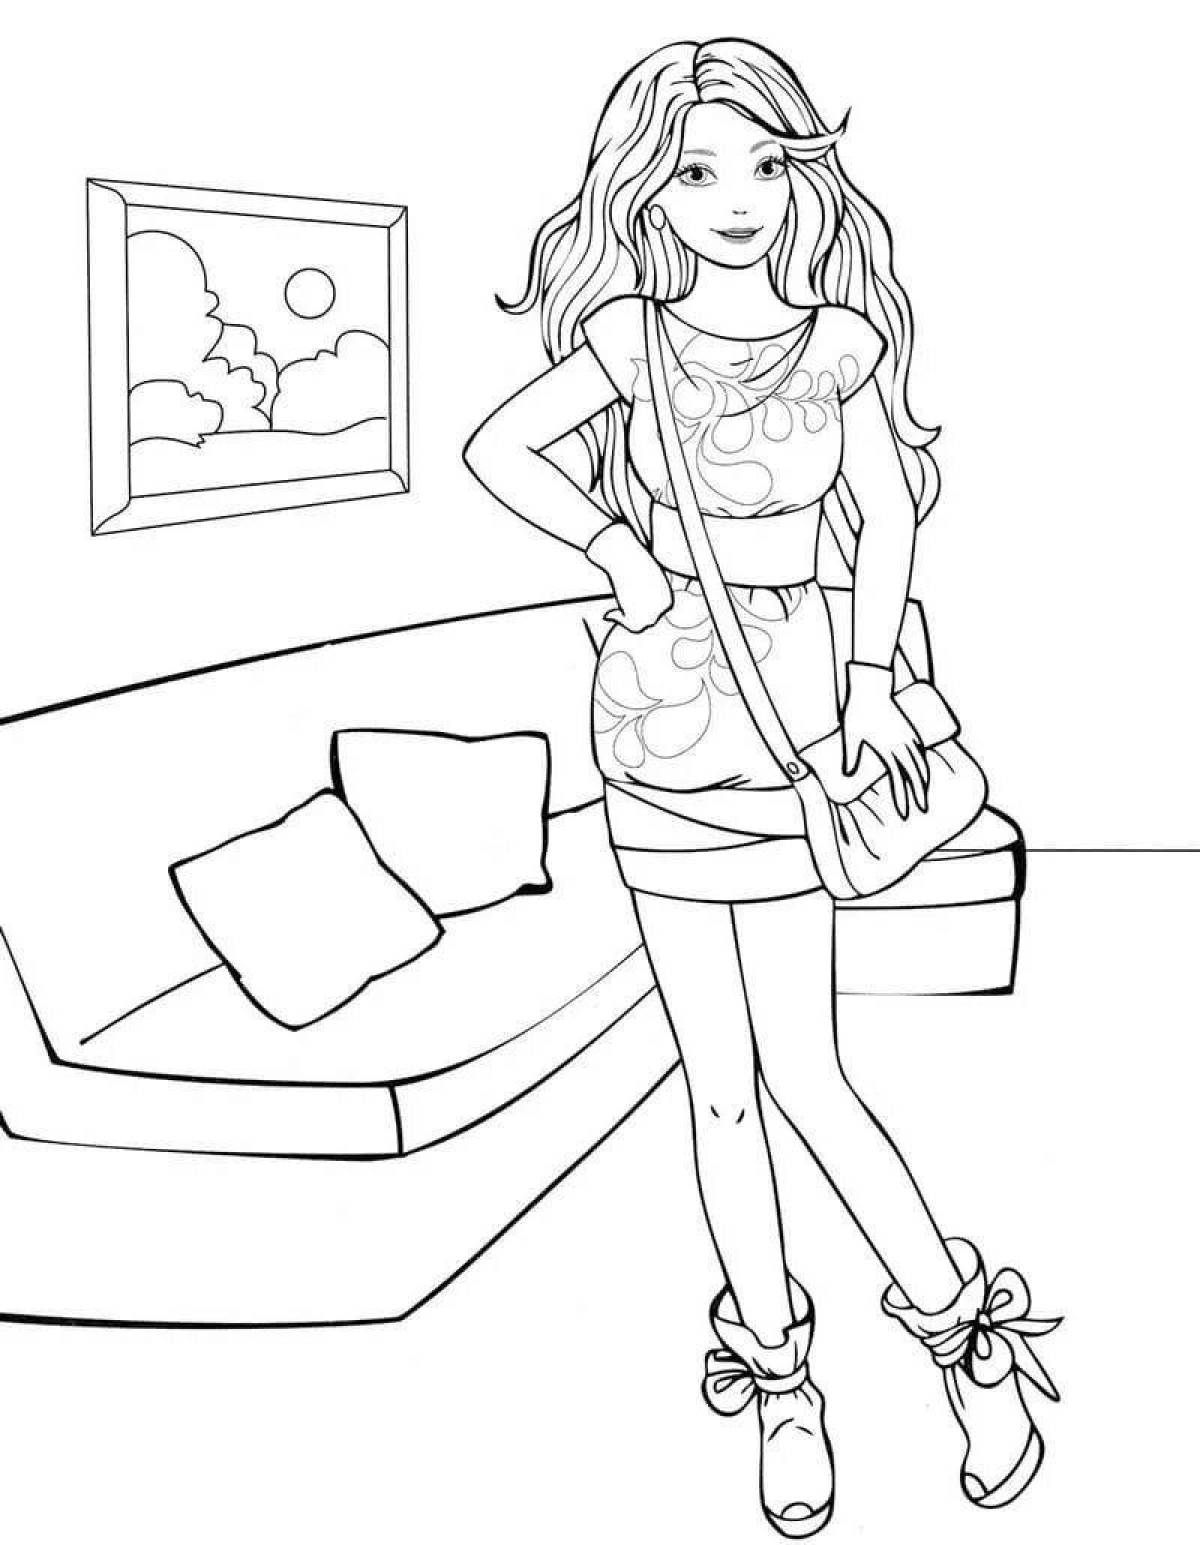 Coloring pages stylish girls - graceful